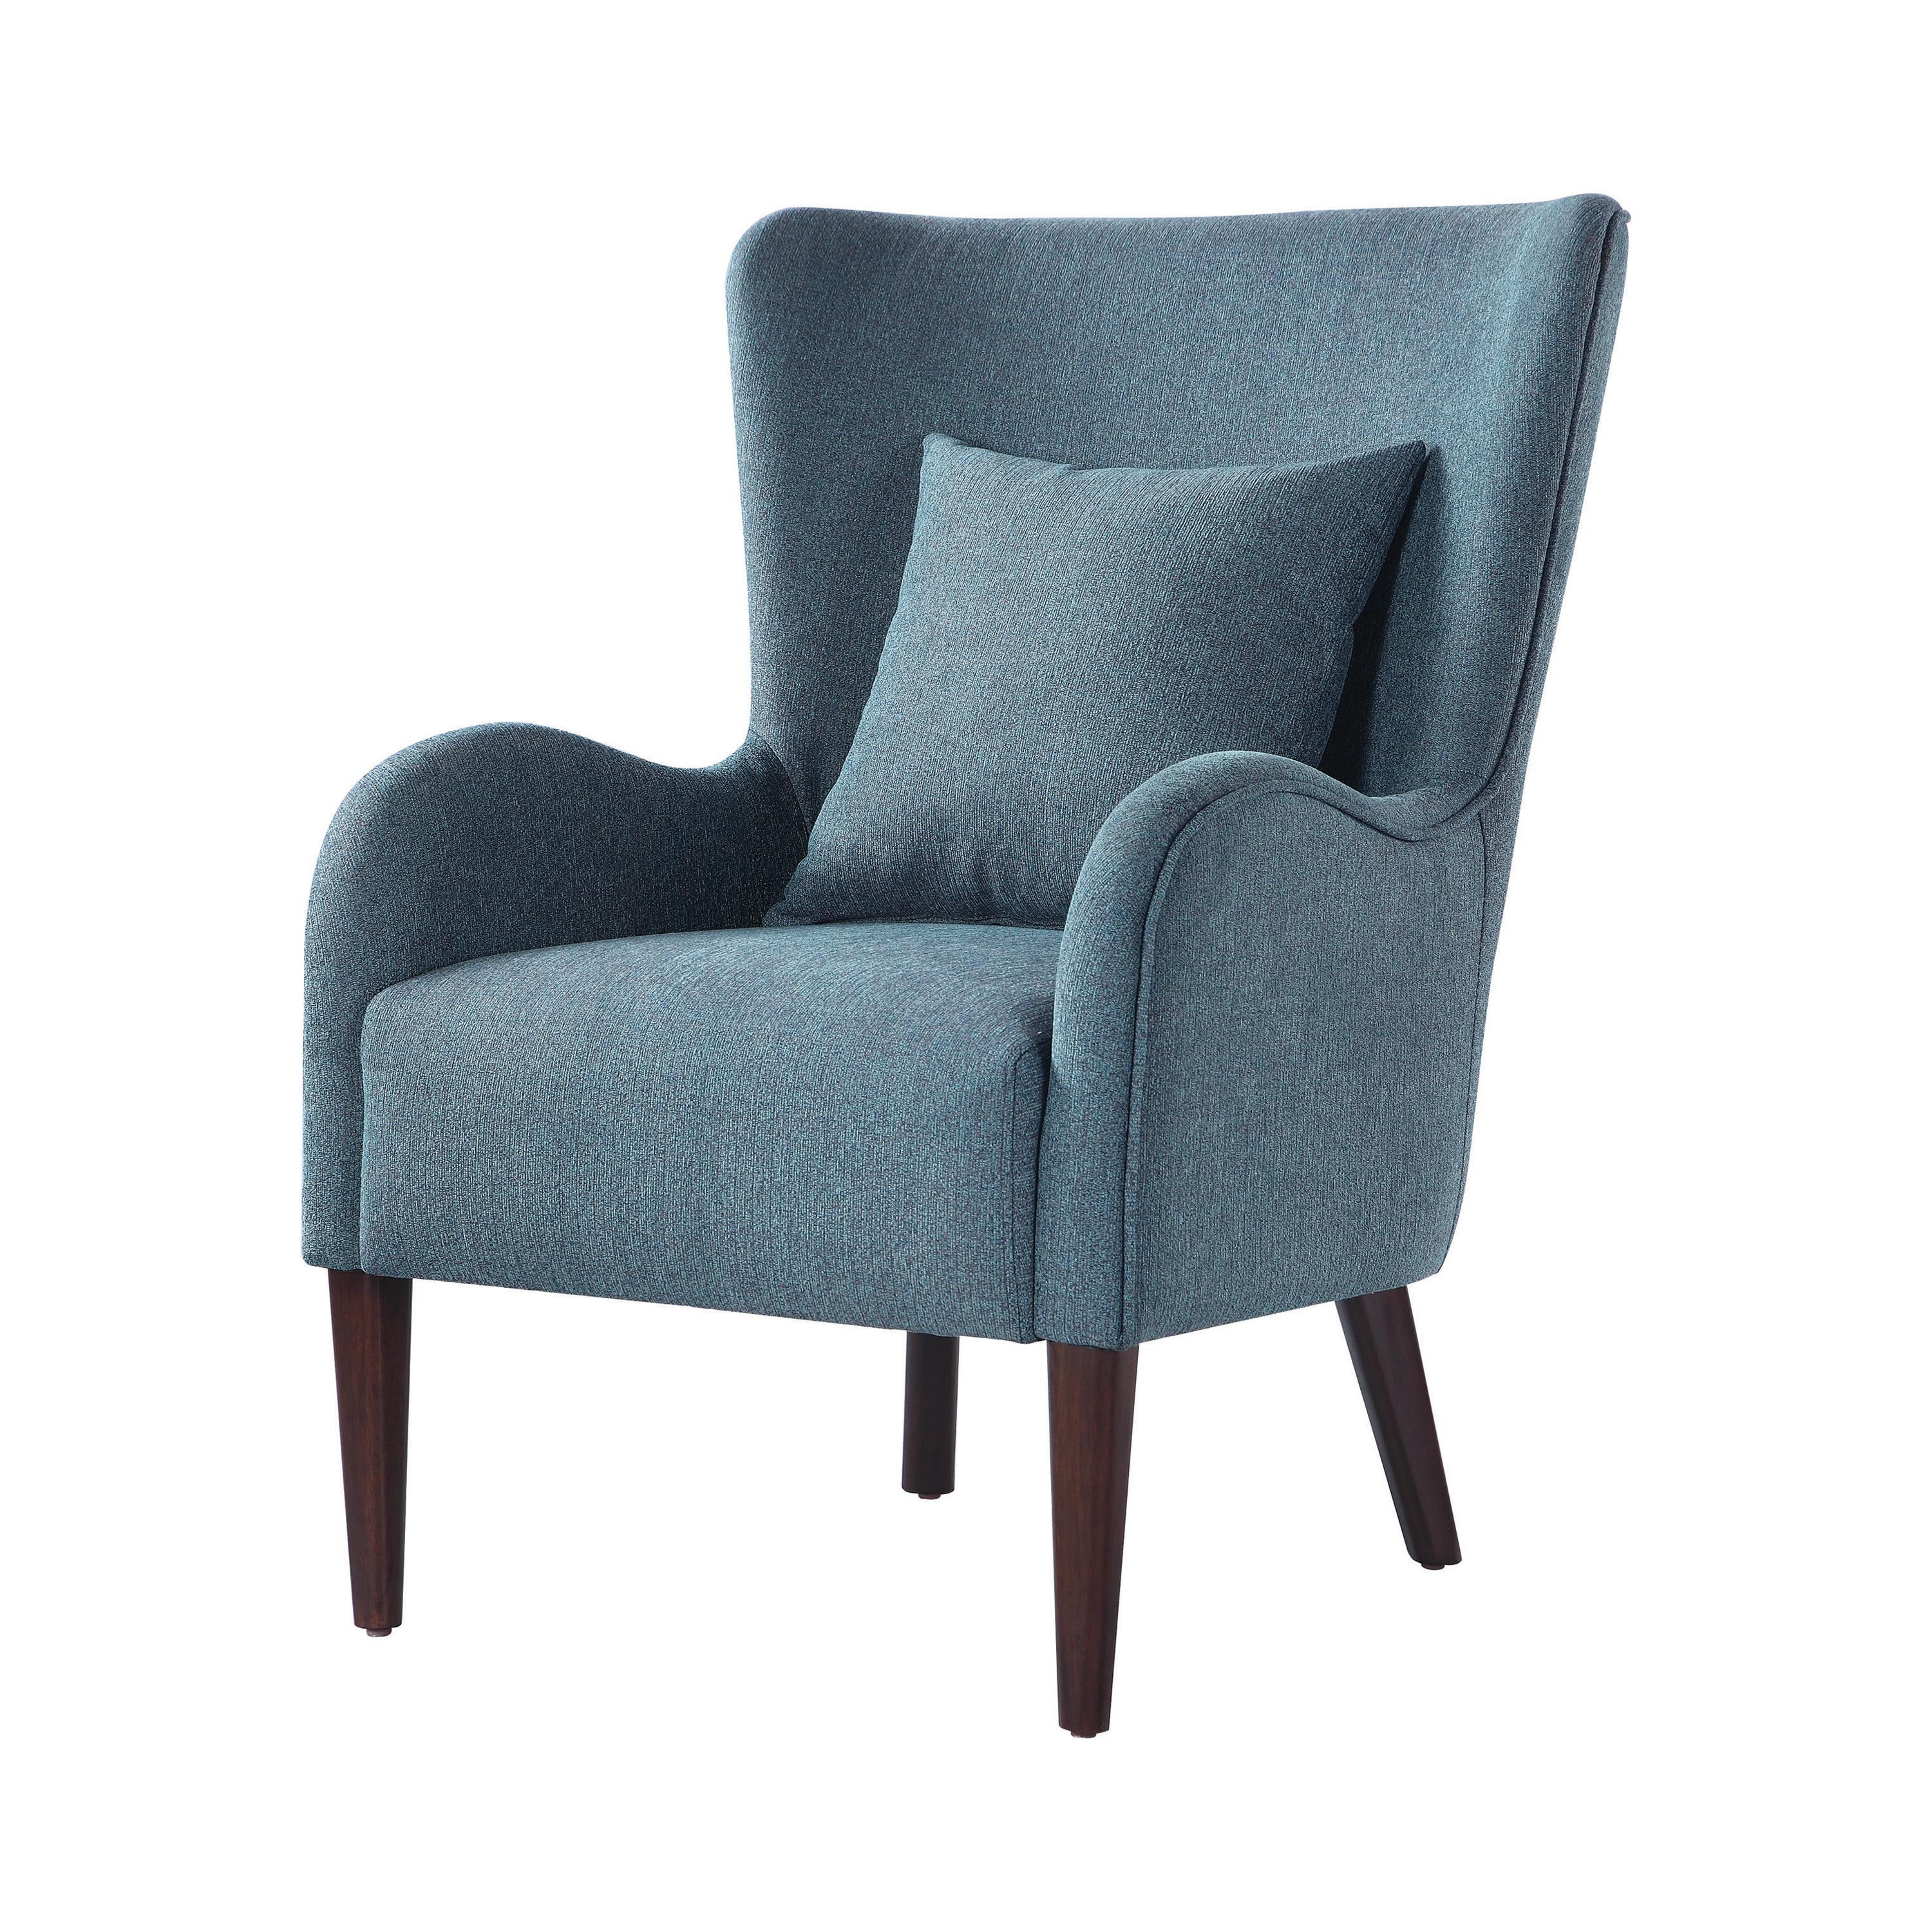 Contemporary Accent Chair 903963 903963 in Blue 